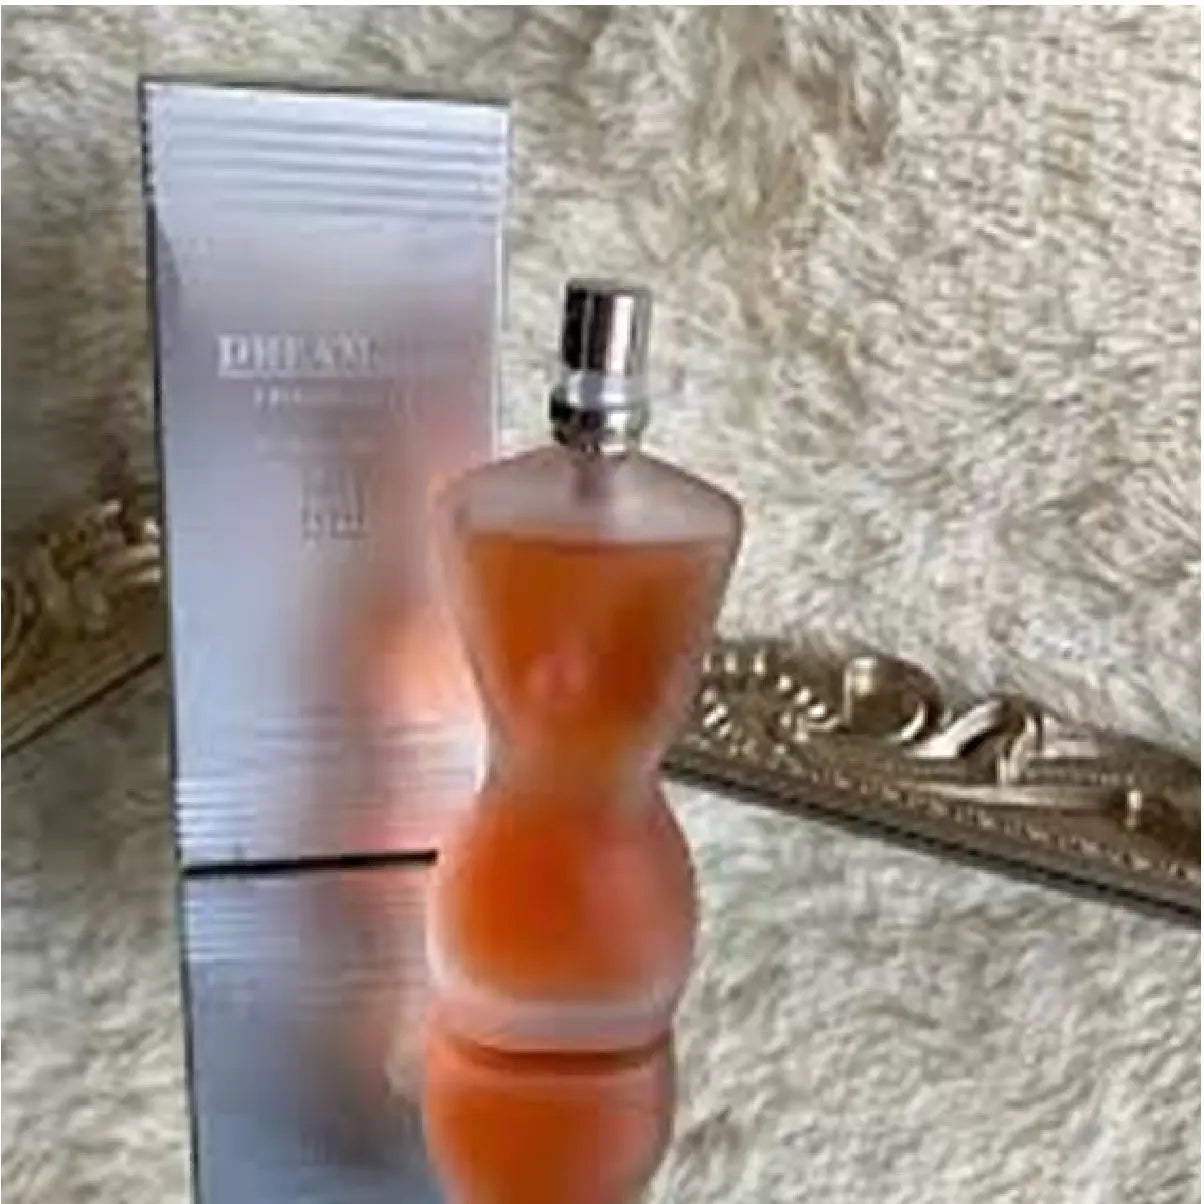 Imported Perfume No. 171 For Women